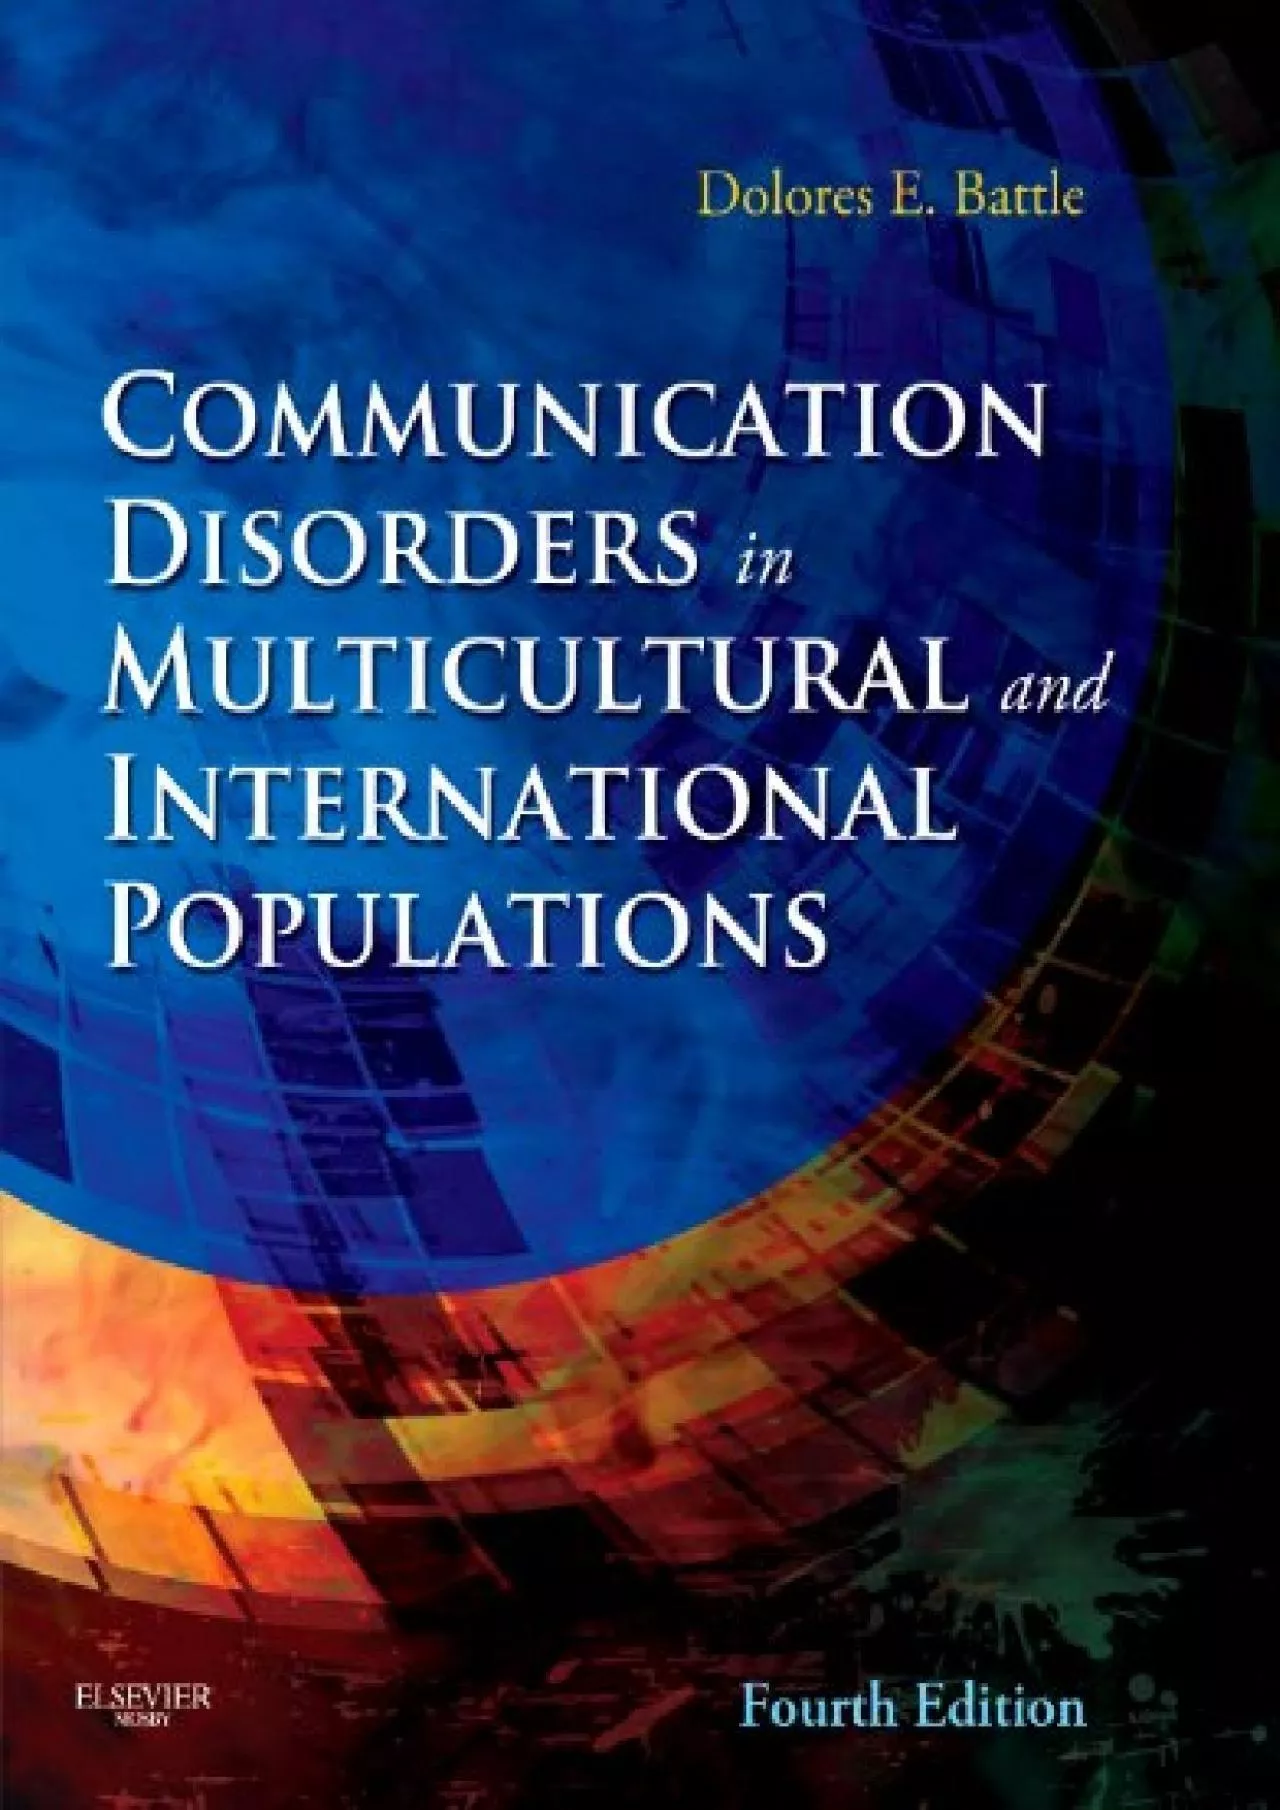 (EBOOK)-Communication Disorders in Multicultural and International Populations (Communication